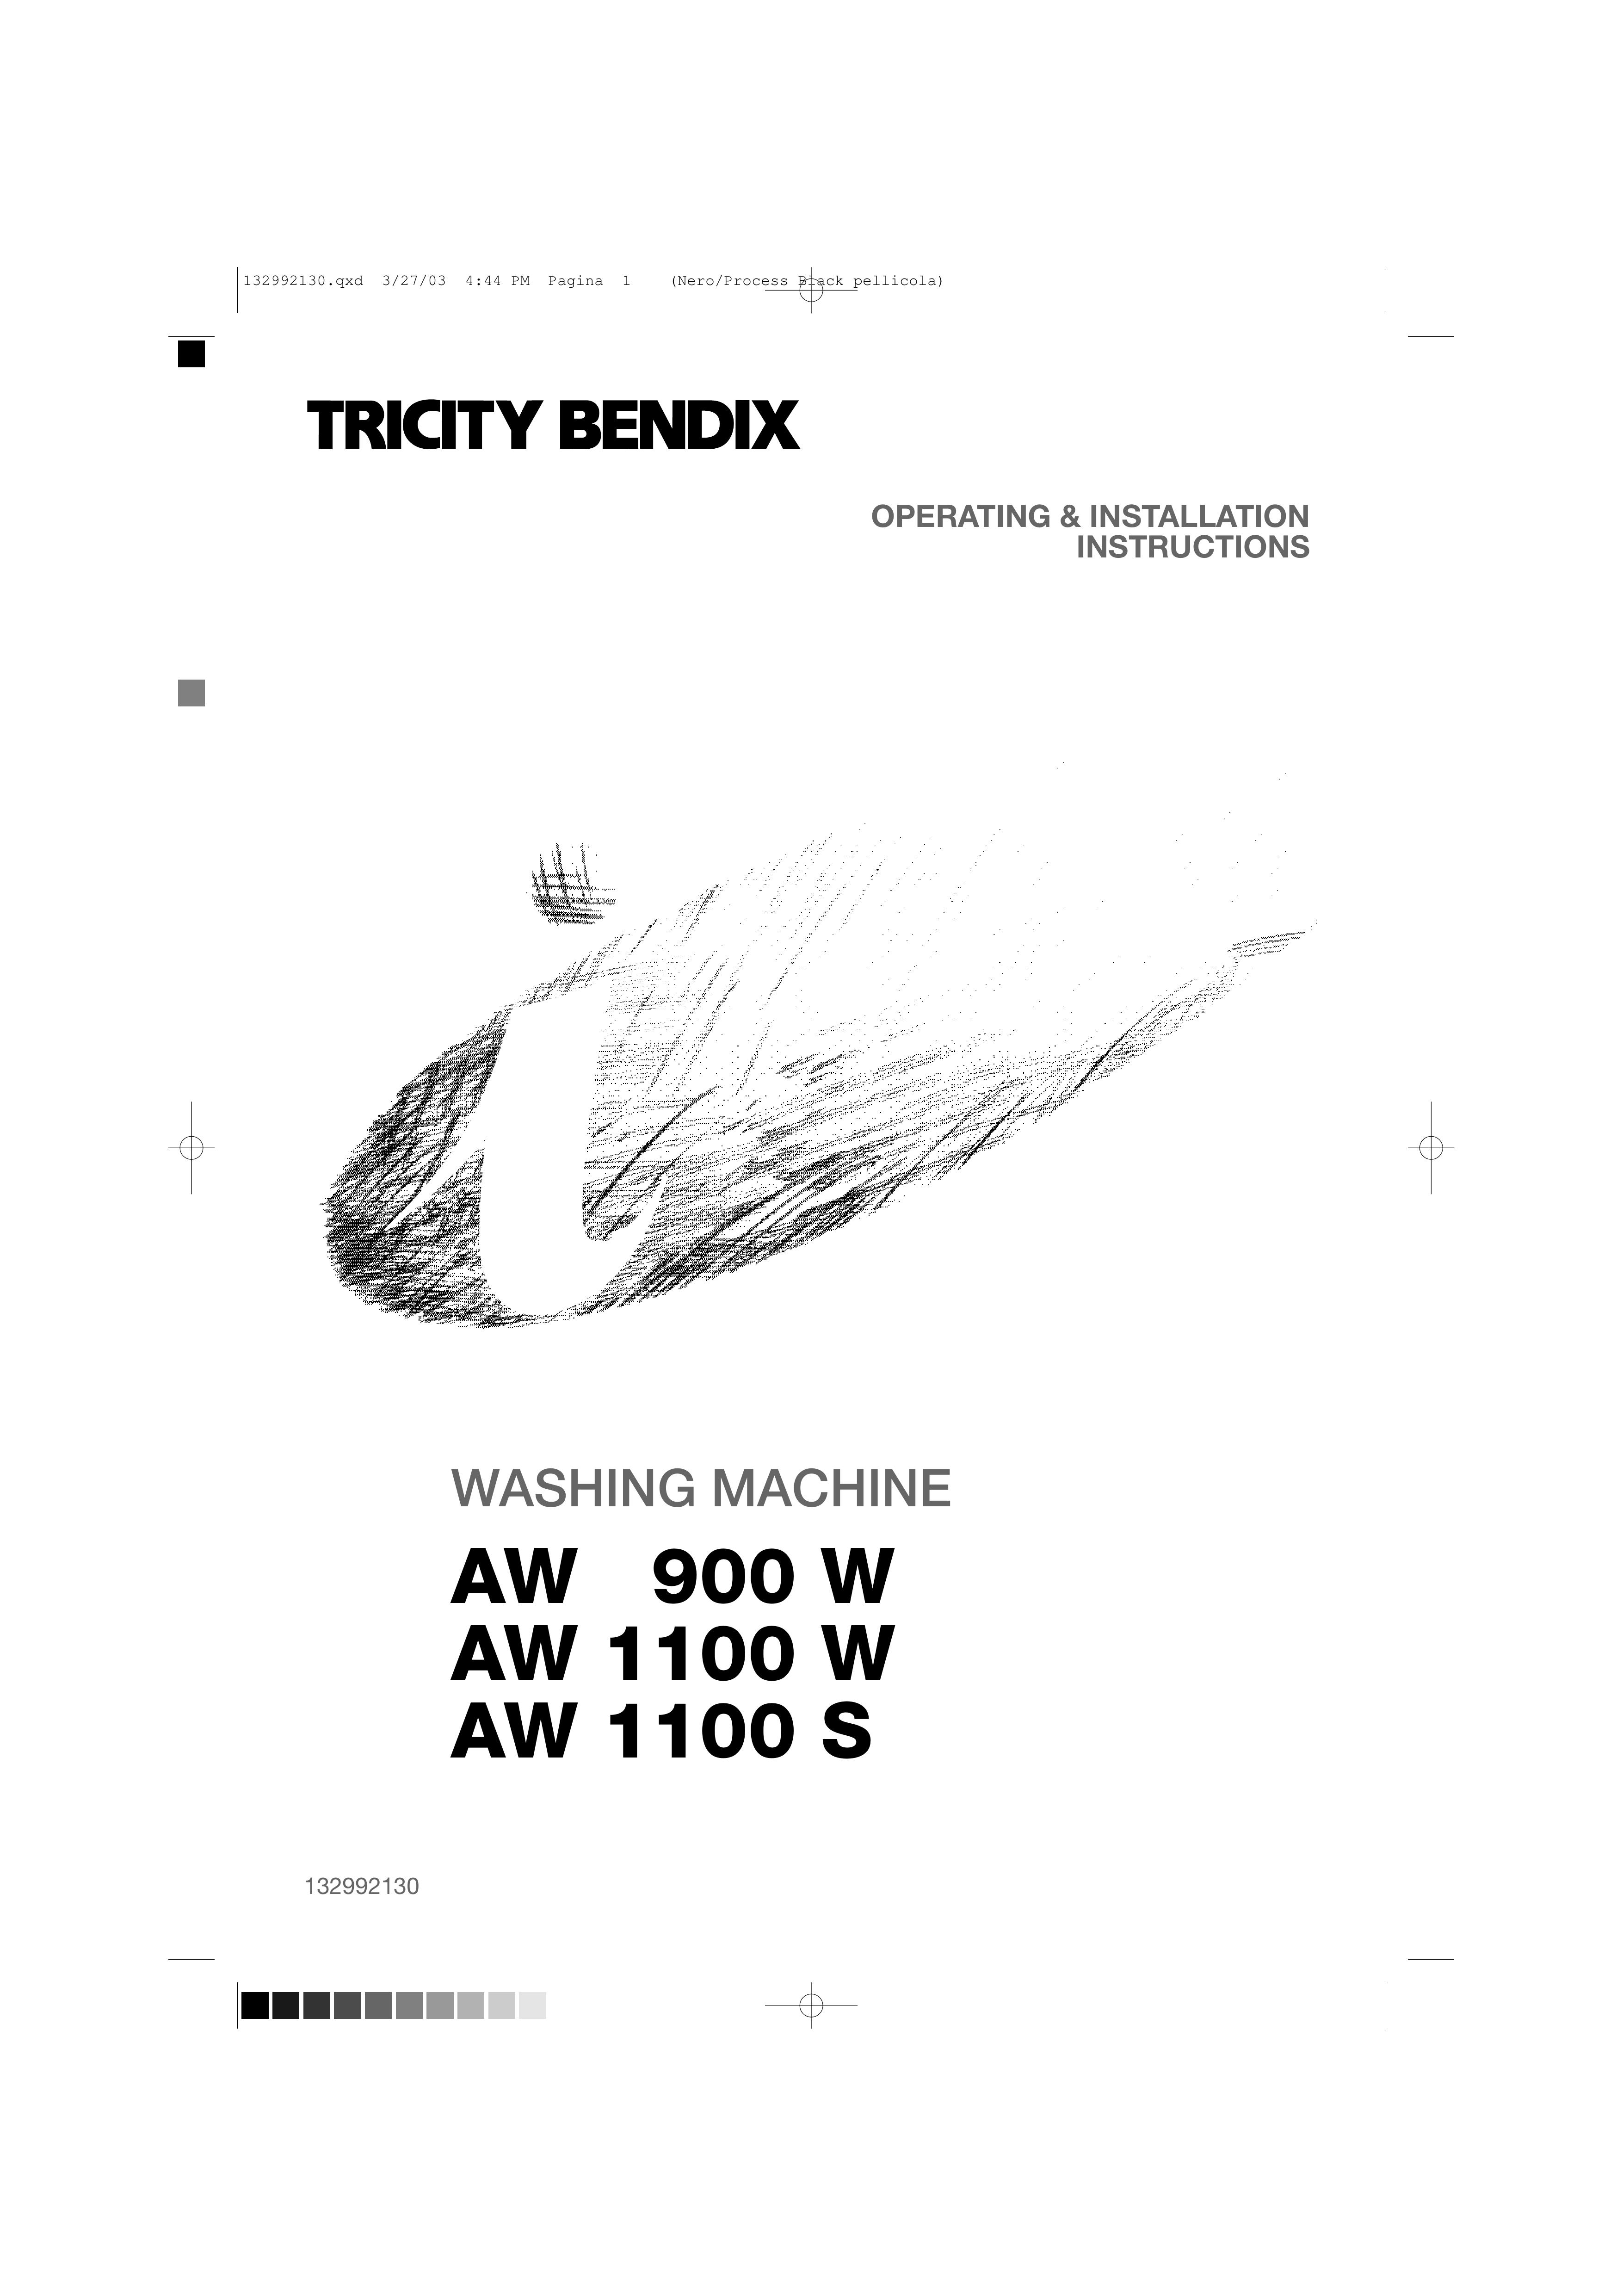 Tricity Bendix AW 1100 S Washer User Manual